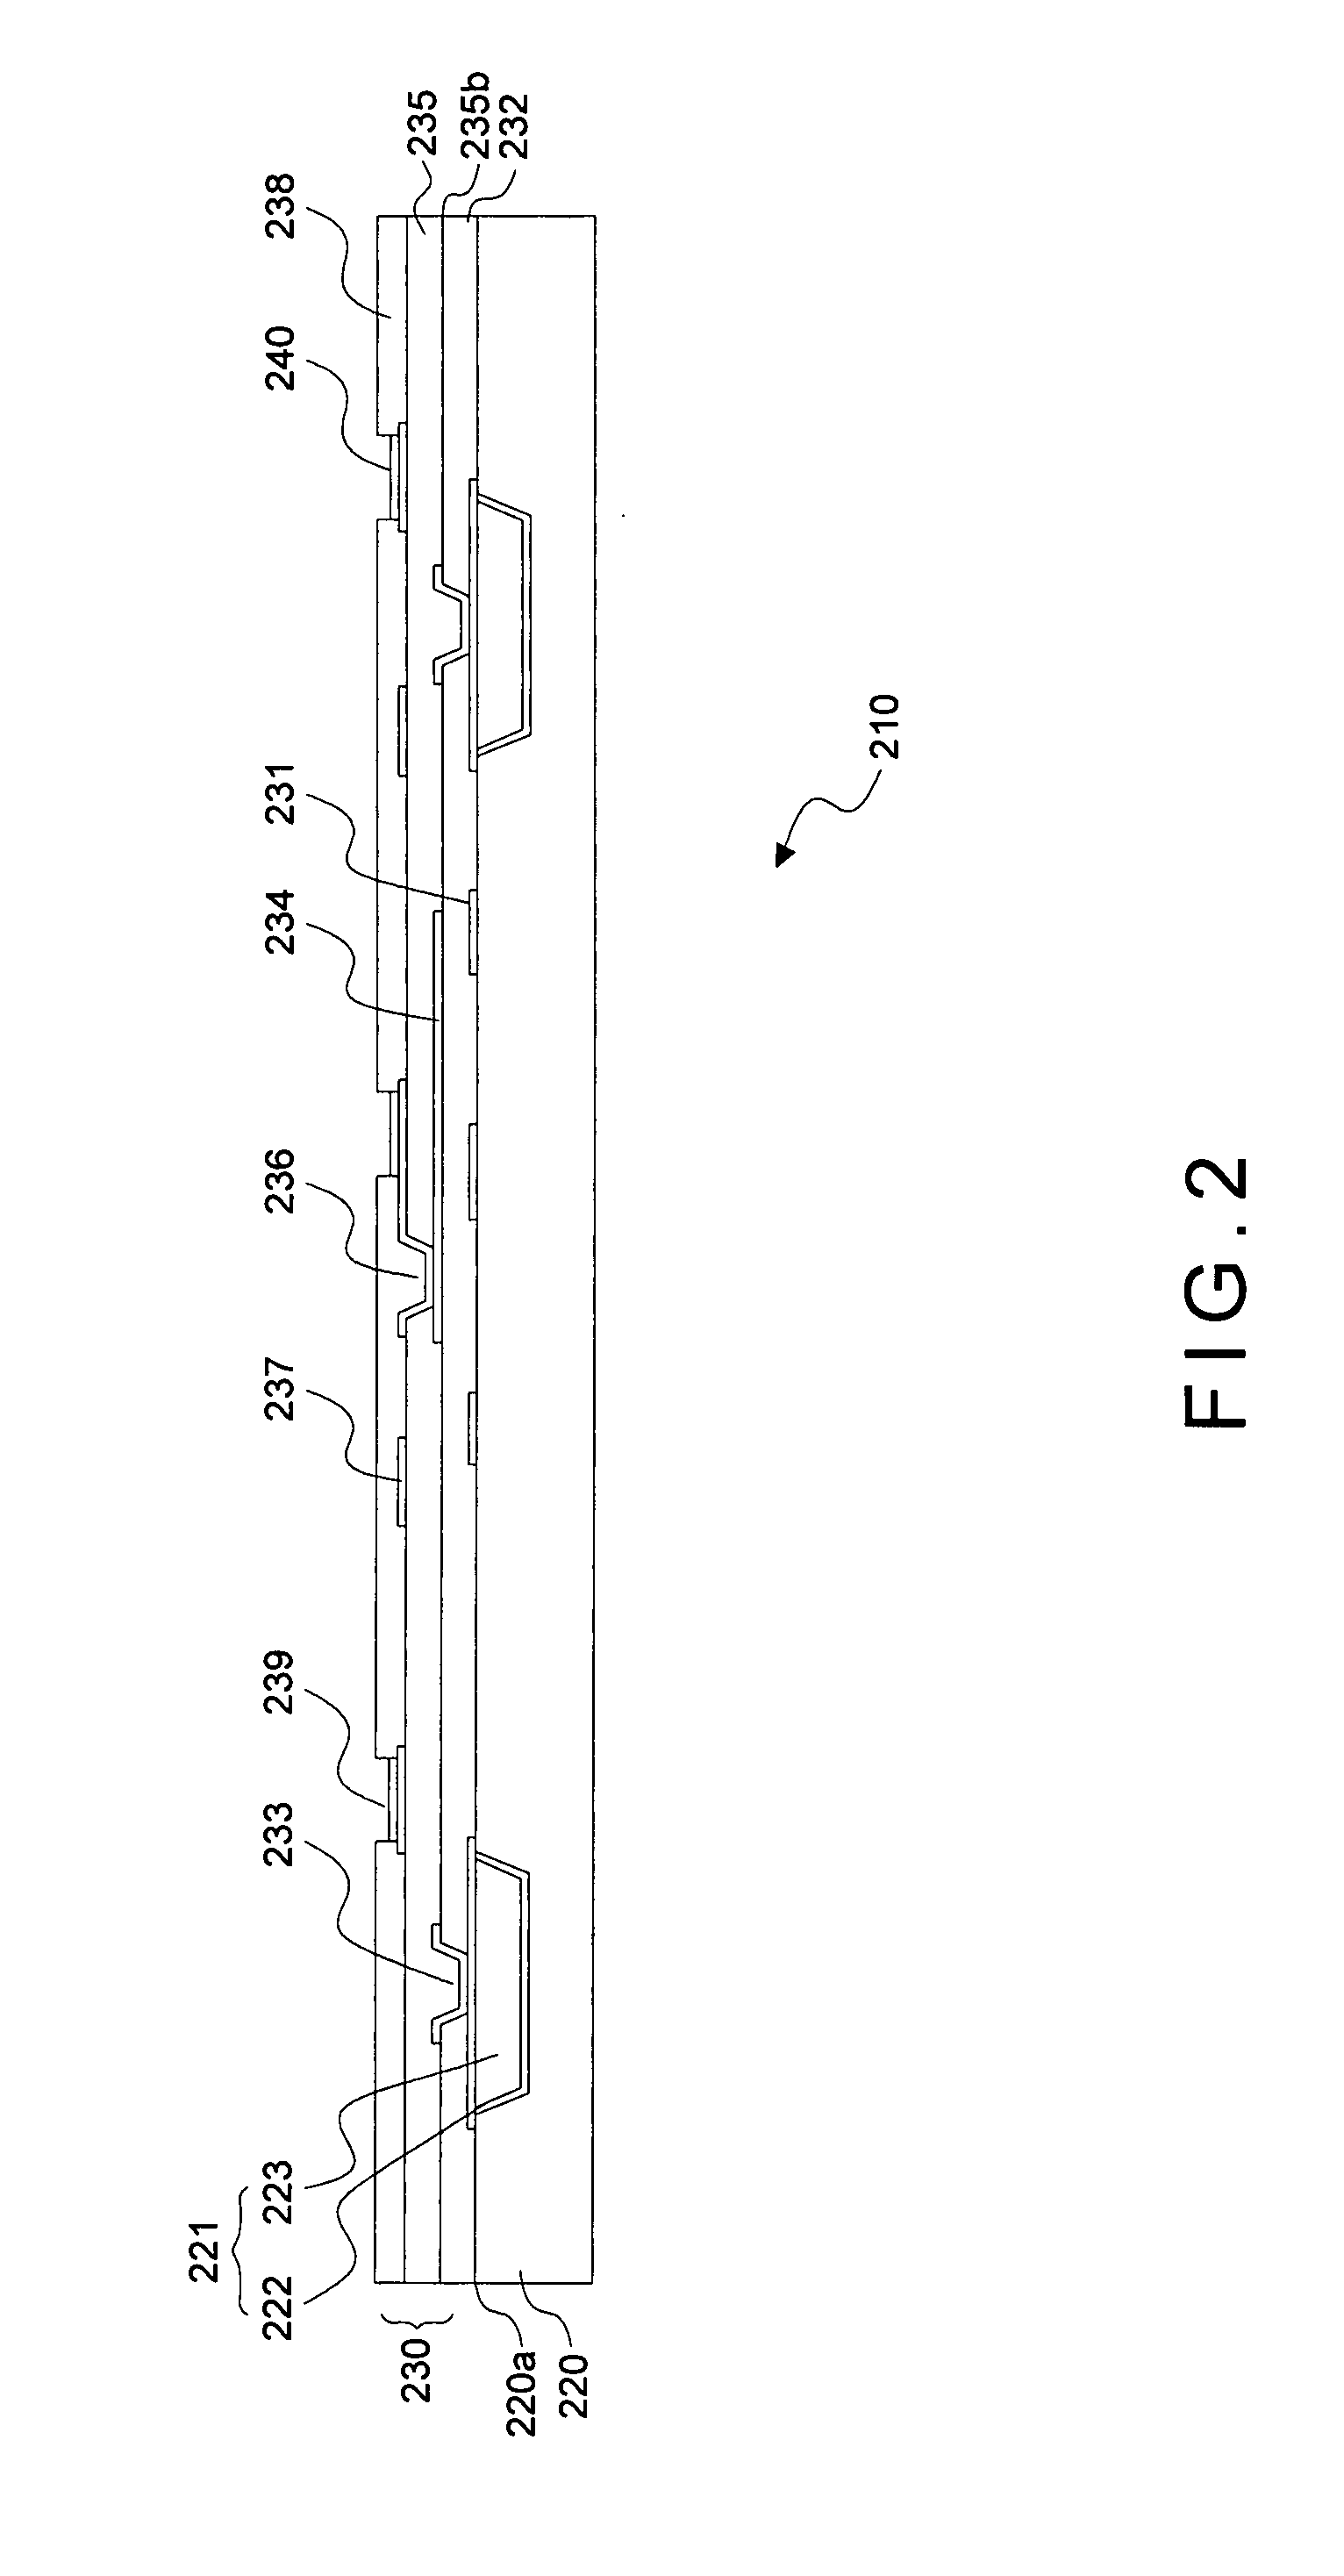 Method of manufacturing semiconductor chip assembly with sacrificial metal-based core carrier